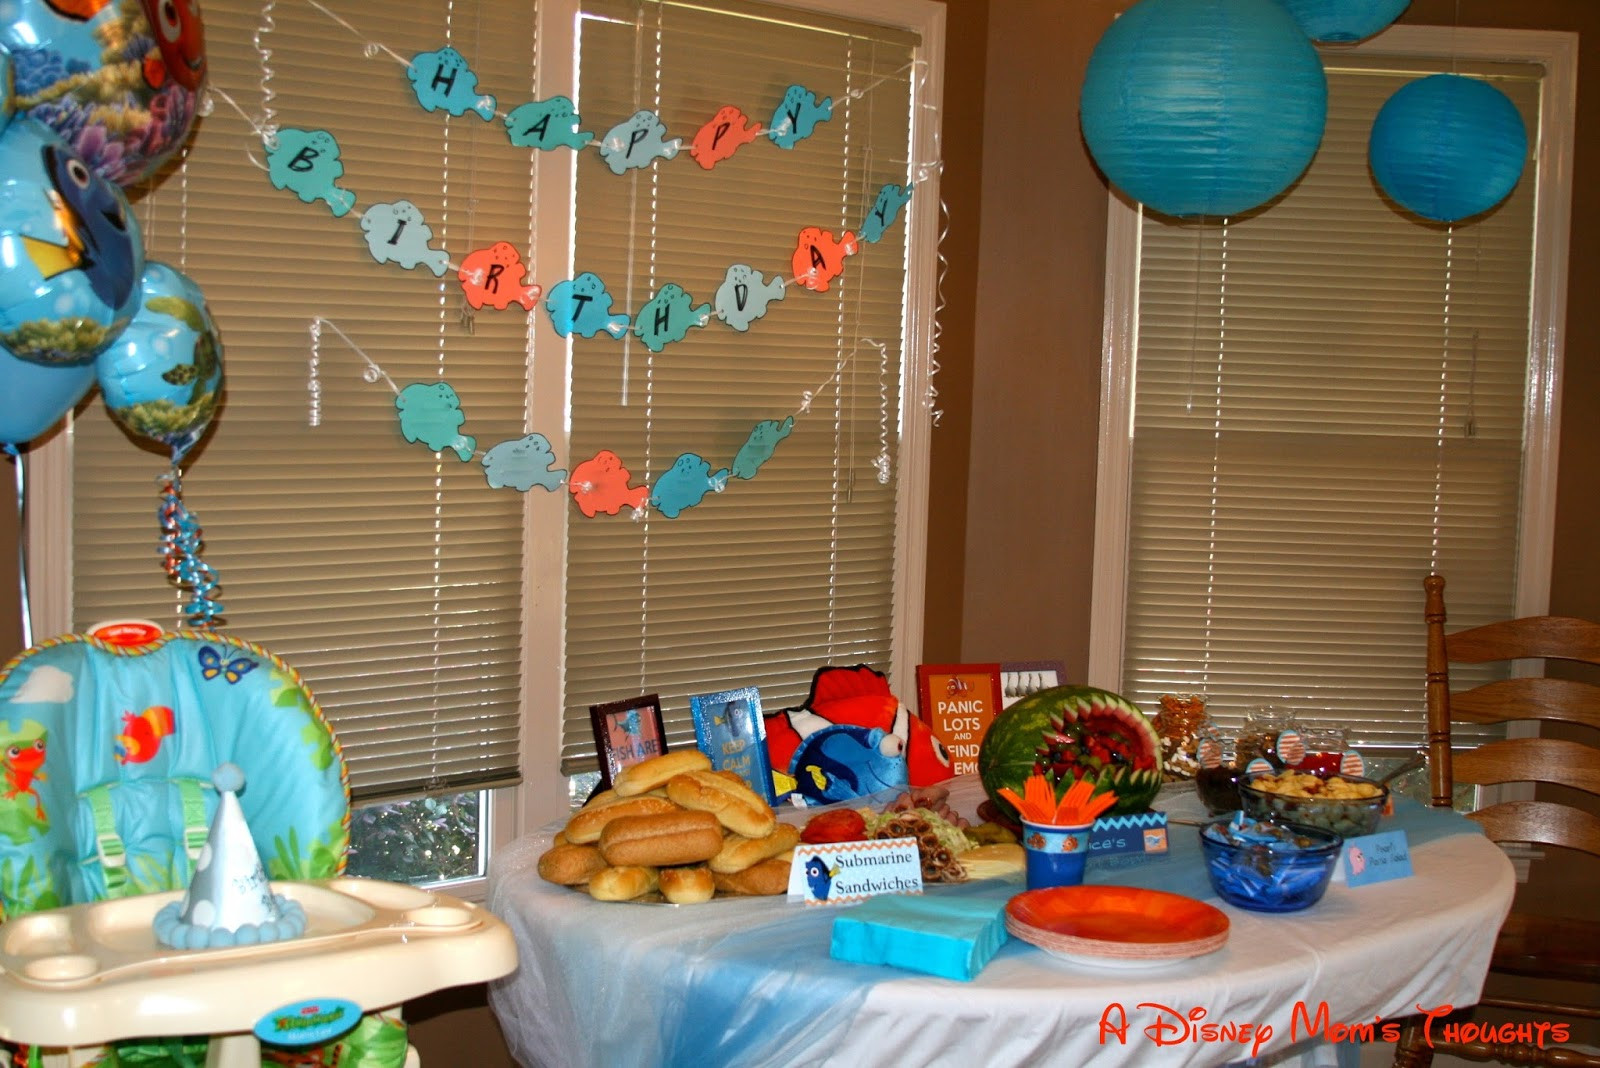 Finding Nemo Birthday Party Decorations
 A Disney Mom s Thoughts Finding Nemo First Birthday